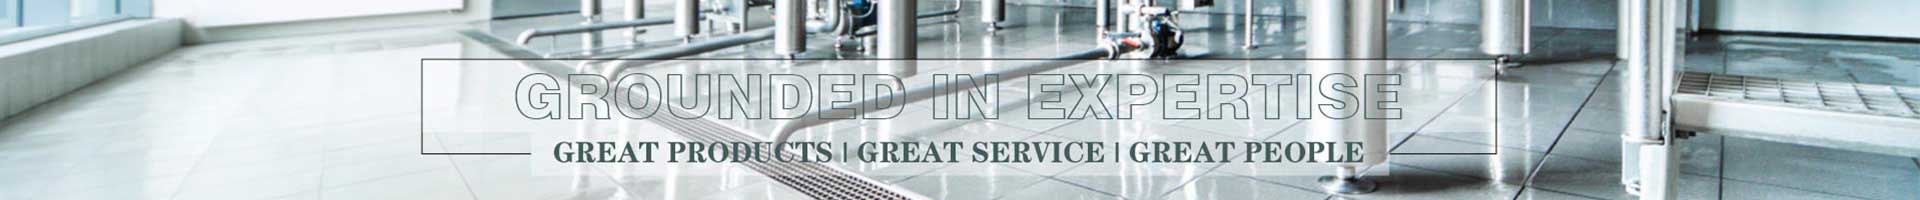 Stainless Steel Drain Grates